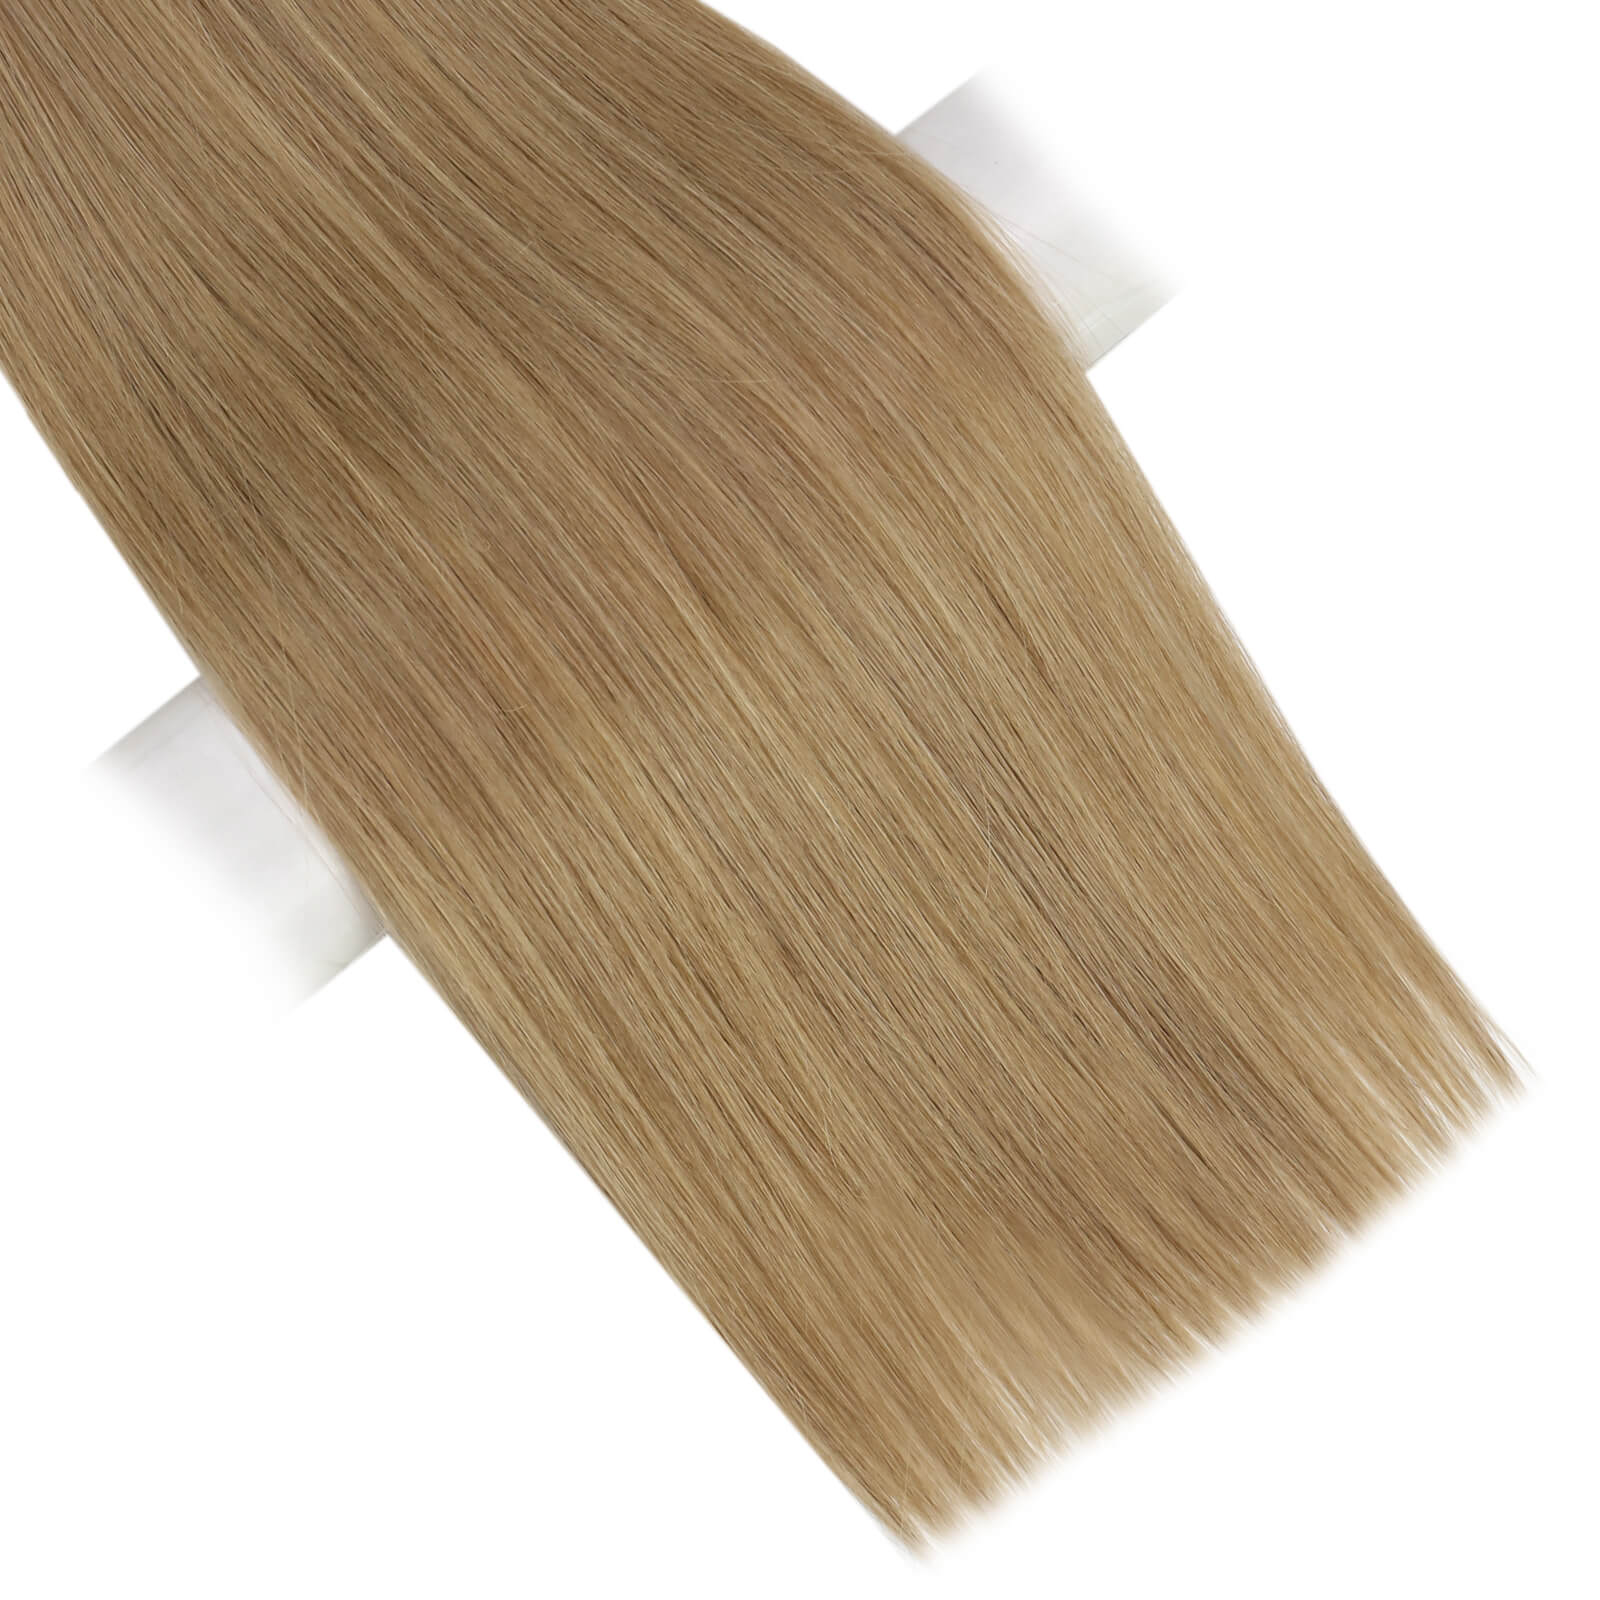 sunny hair flat track weft extensions, sunny hair Flat weft, sunny hair flat weft hair, sunny hair flat weft hair extensions, 